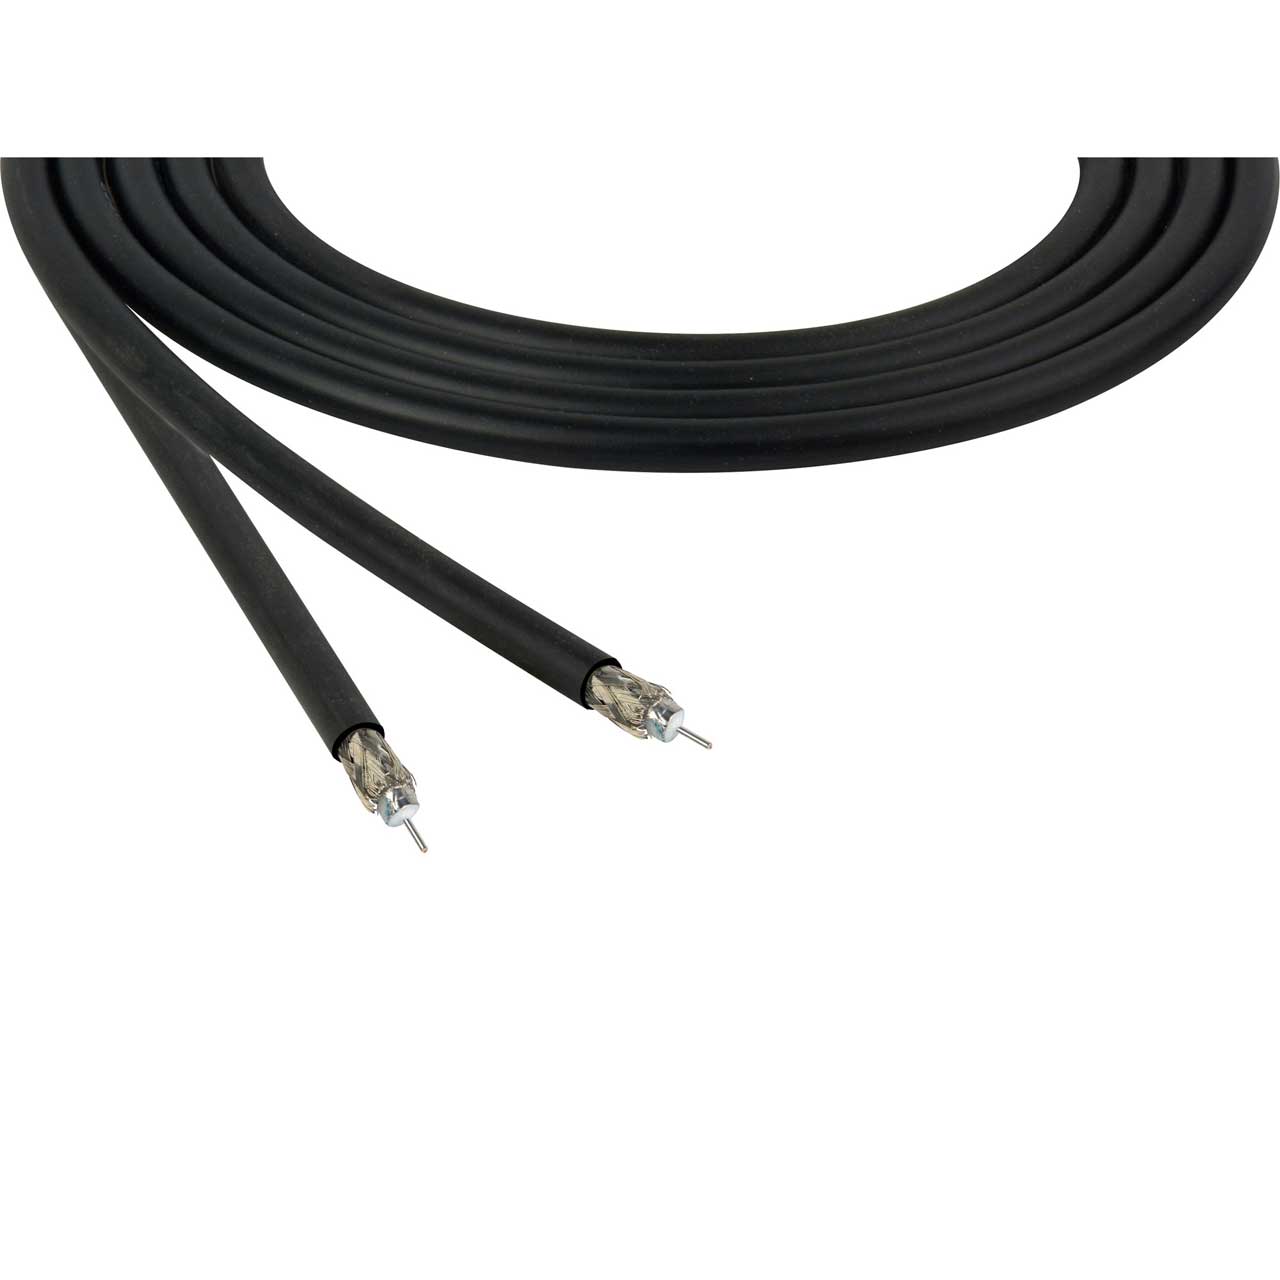 Test Cable Assembly, Coaxial Cable, Mini-HDMI Breakout to 6 BNC, 15 cm